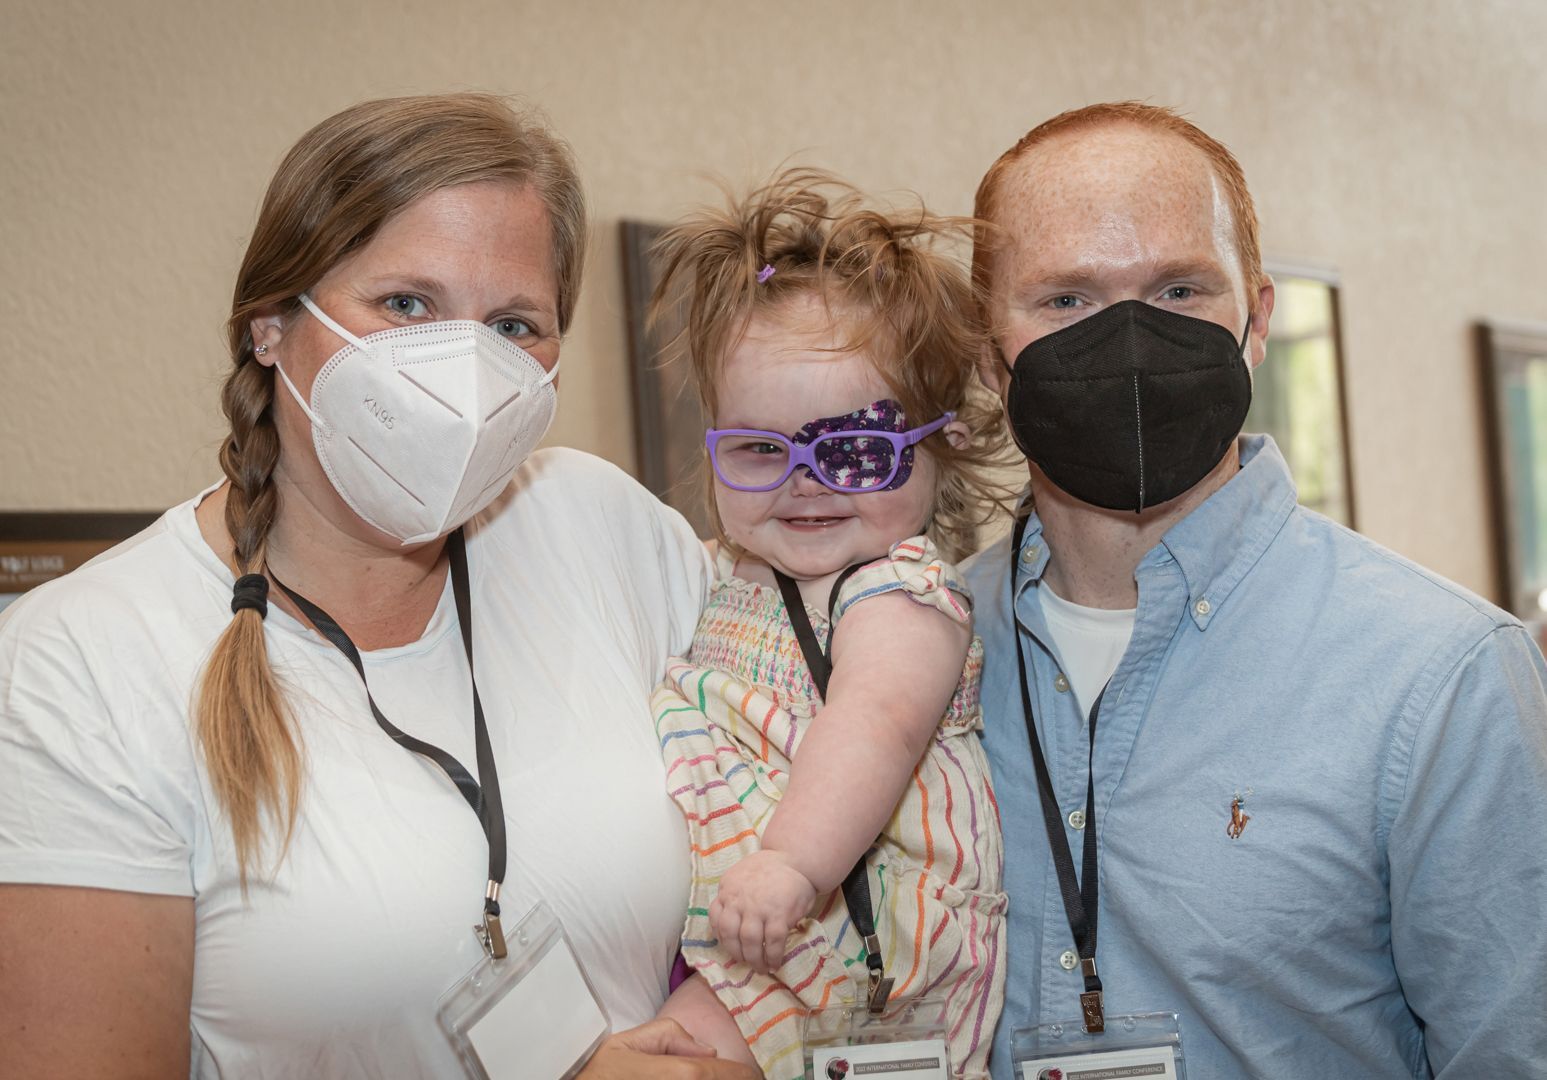 Family of three, mom on the left, daughter in the middle, and dad on the right. All wearing face masks. Little girl in the middle is wearing an eye patch.